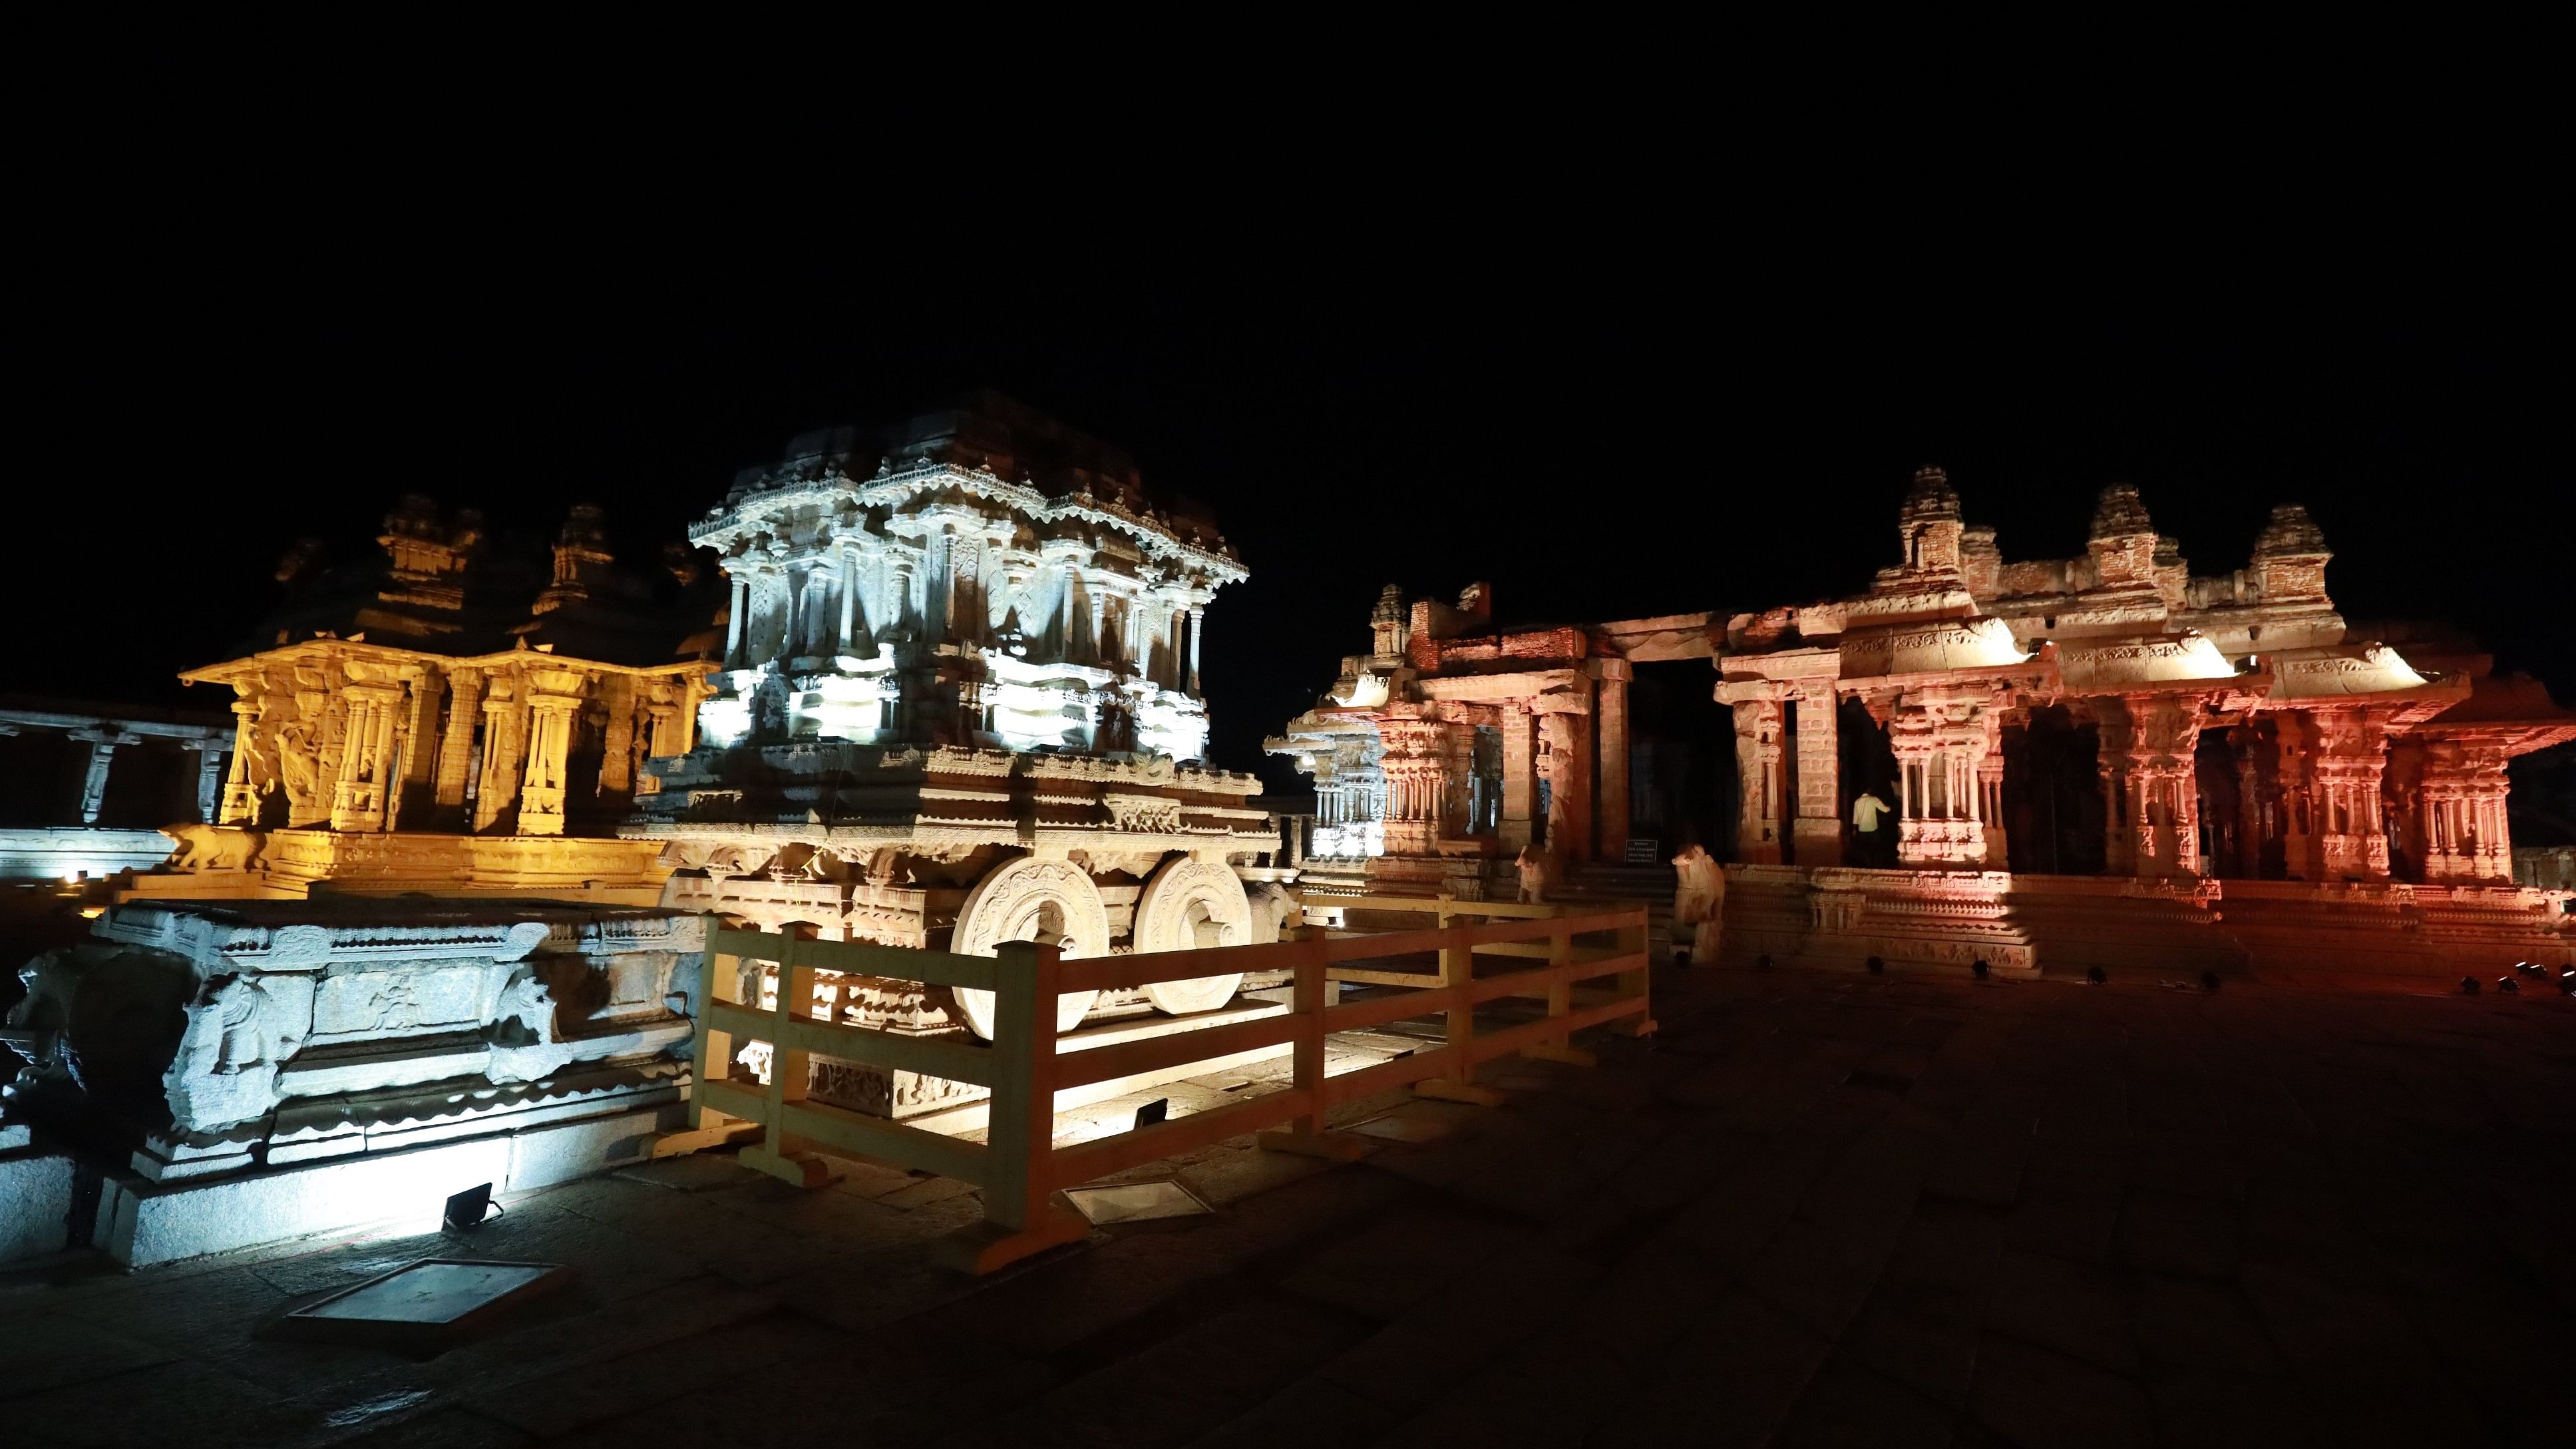 <div class="paragraphs"><p>The illuminated Vijaya Vithala temple and stone chariot in Hampi give an other worldly feel.  </p></div>